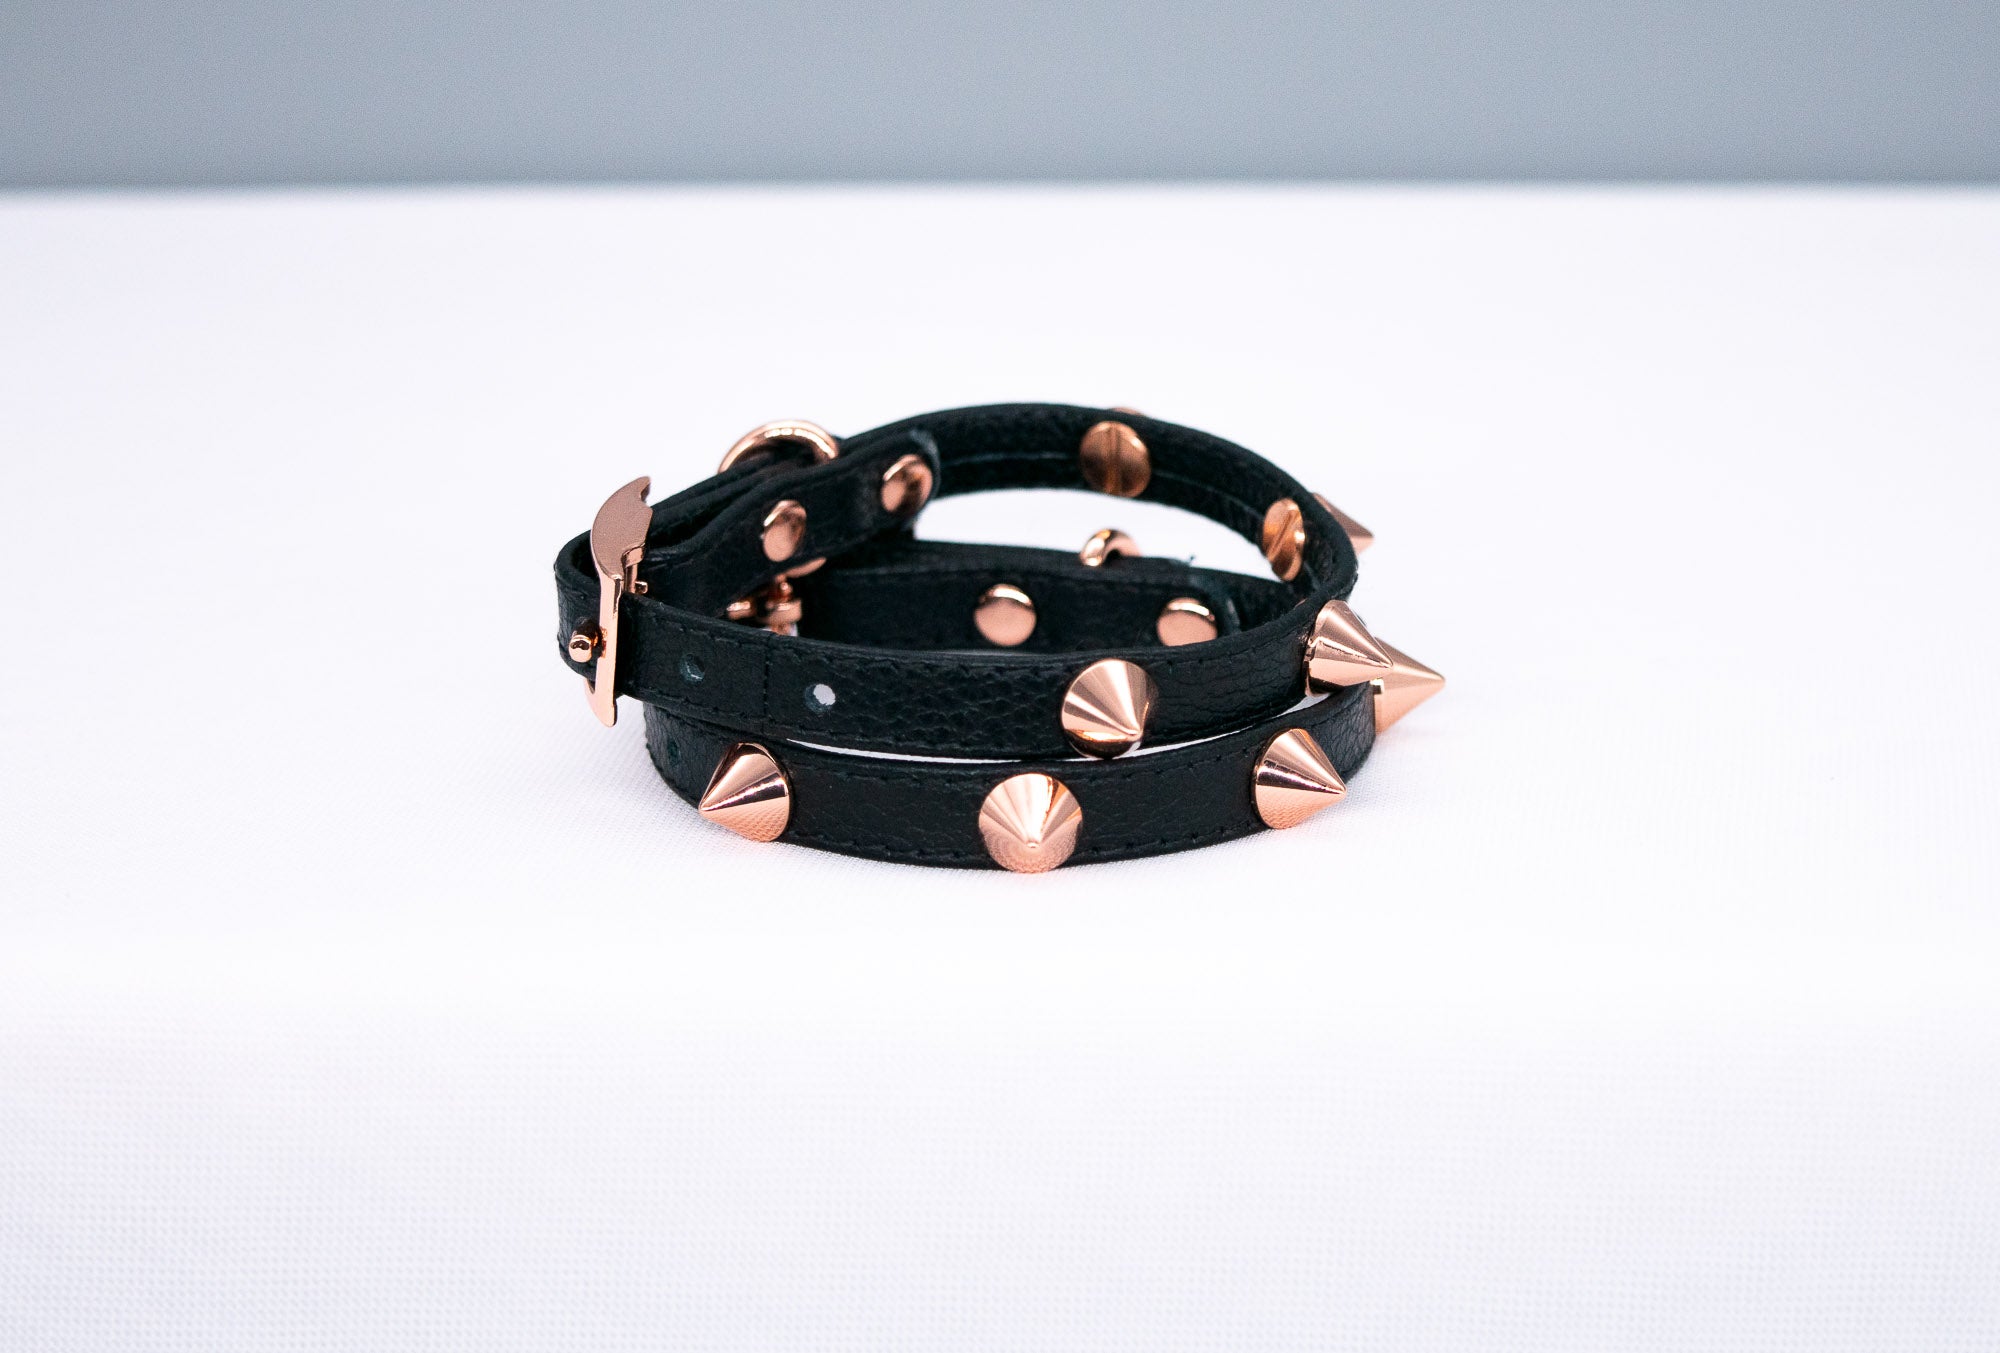 3/8" Black Leather Spiked Cuffs